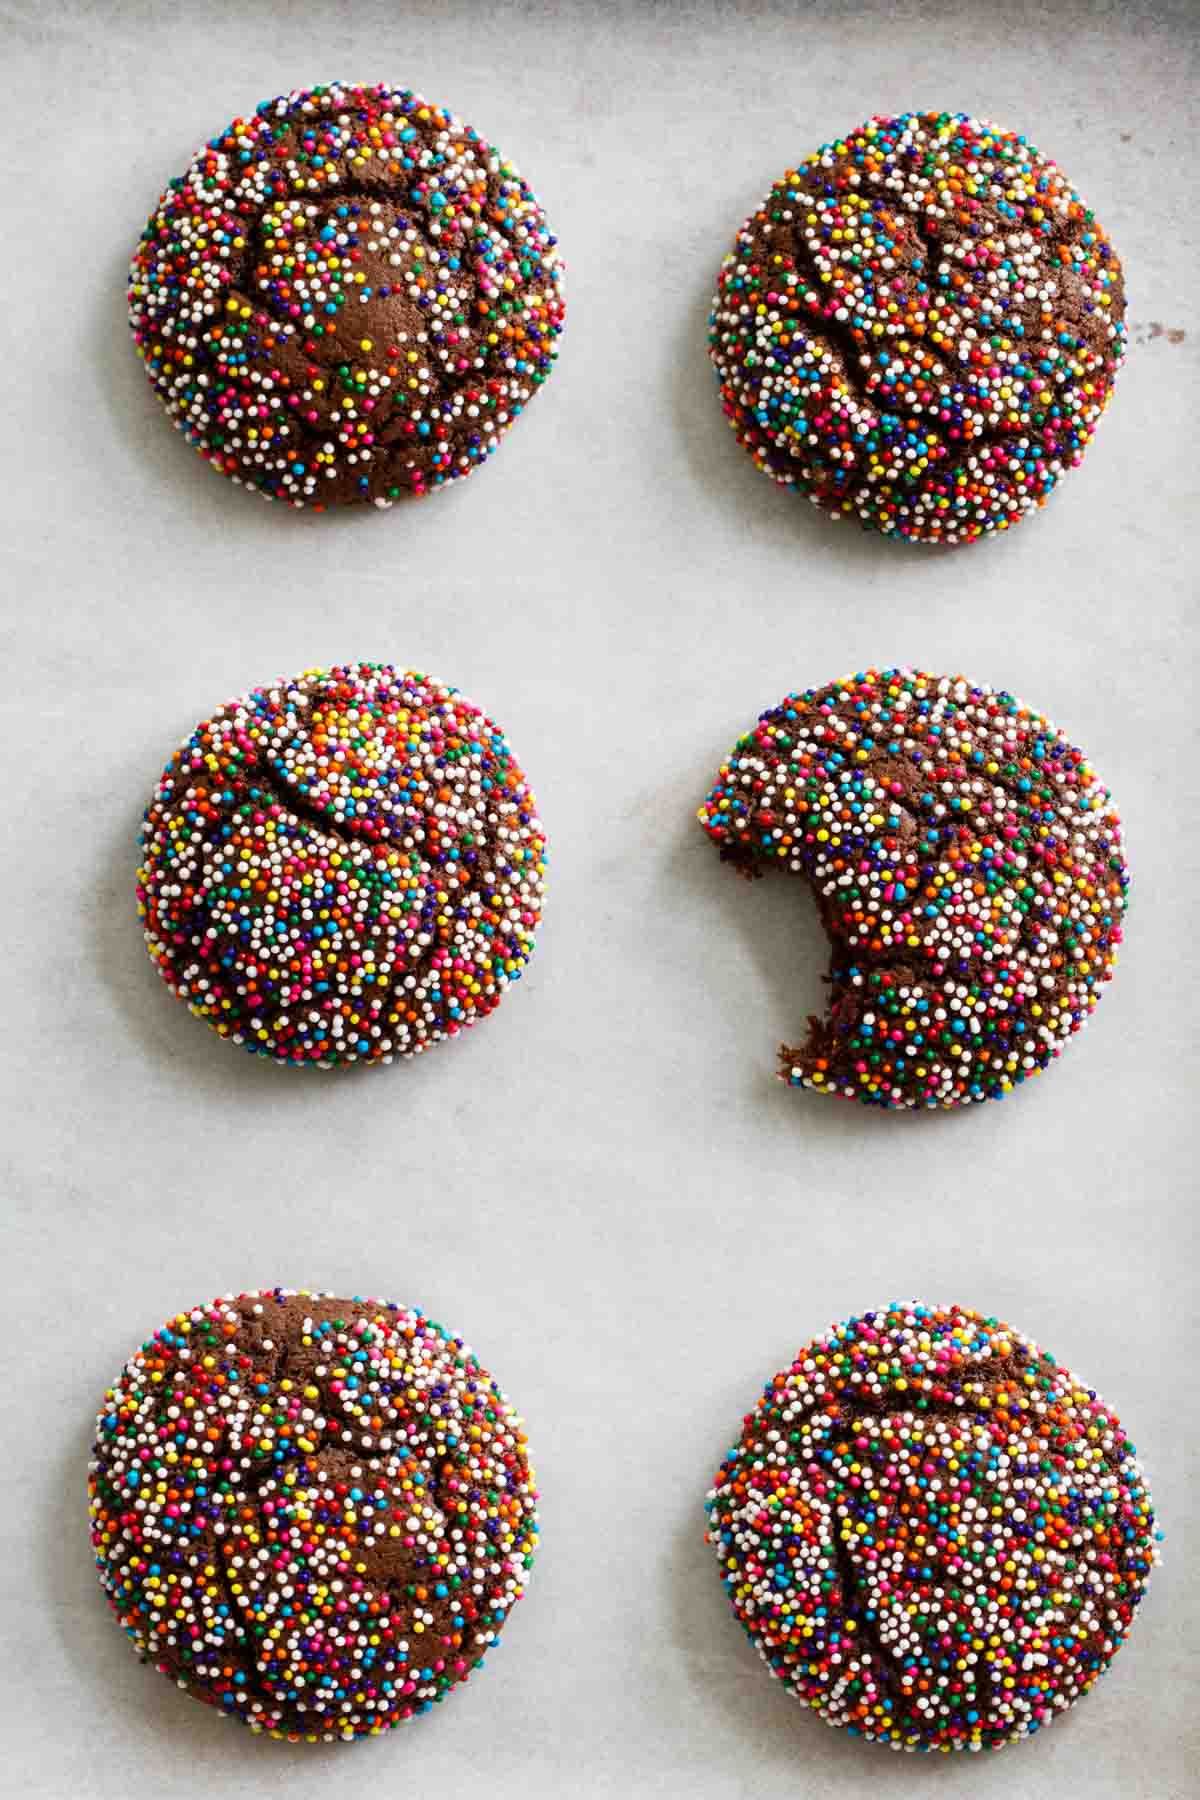 6 Chocolate Crinkle Sprinkle Cookies with a bite out of one